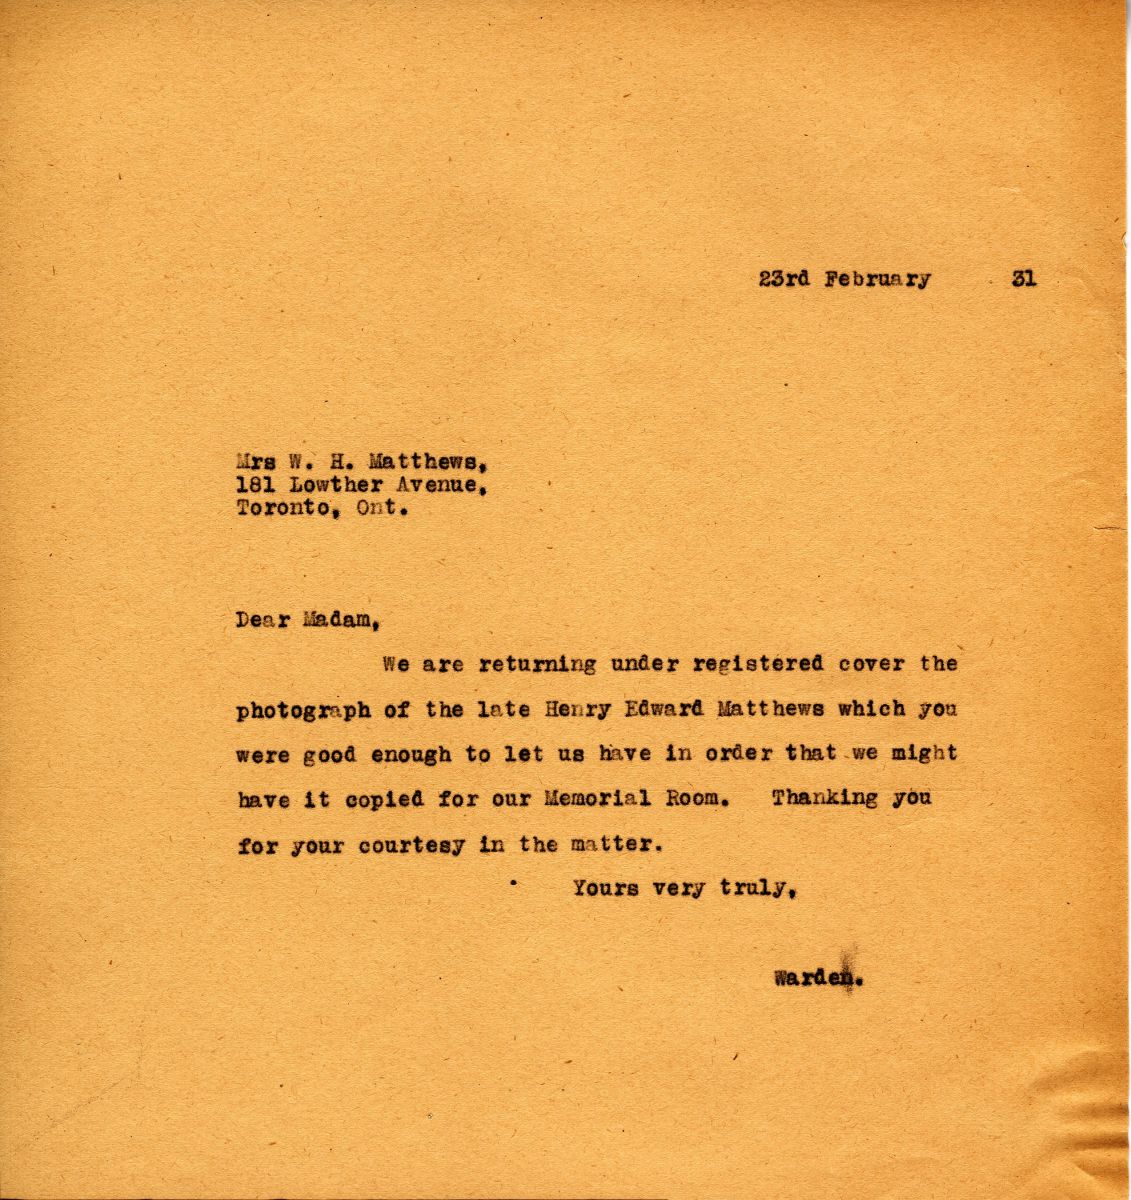 Letter from the Warden to Mrs. W.H. Matthews, 23rd February 1931